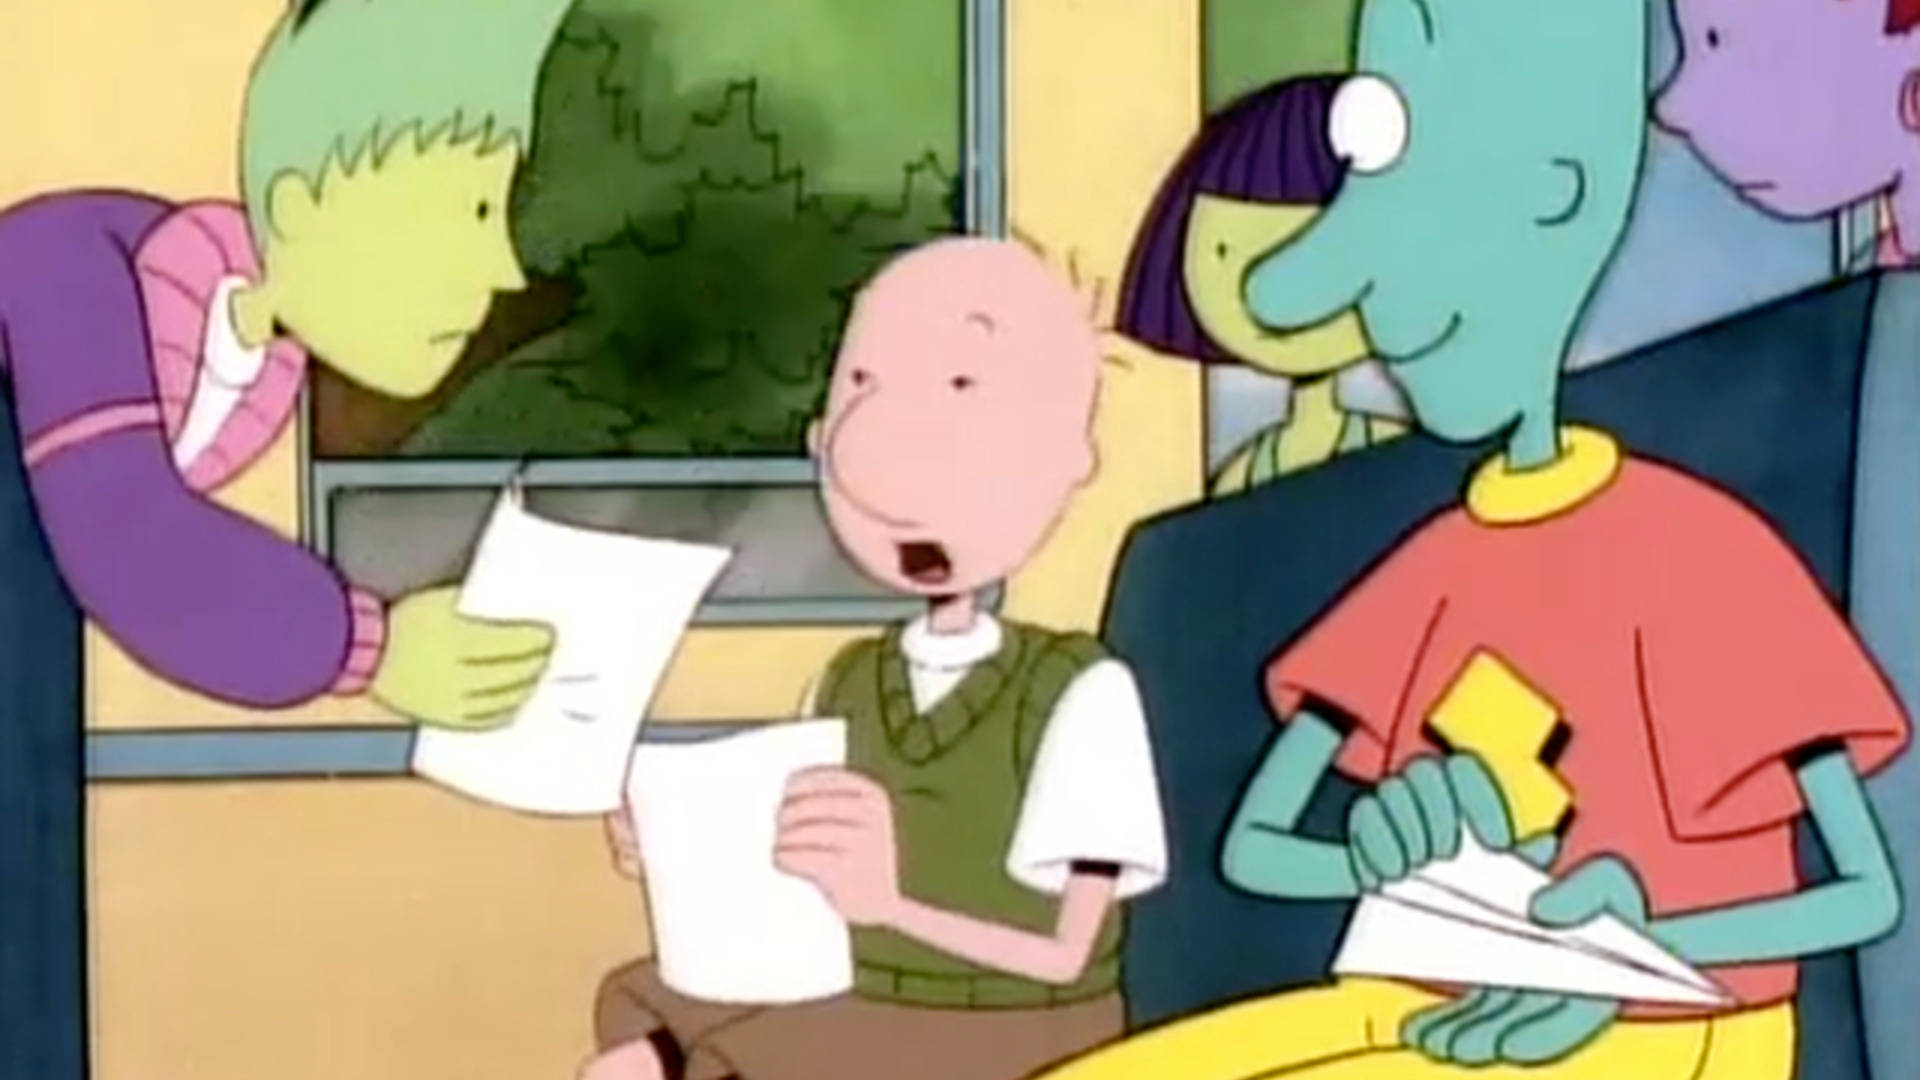 Doug Funnie and Skeeter Valentine Studying in a Classroom Wallpaper